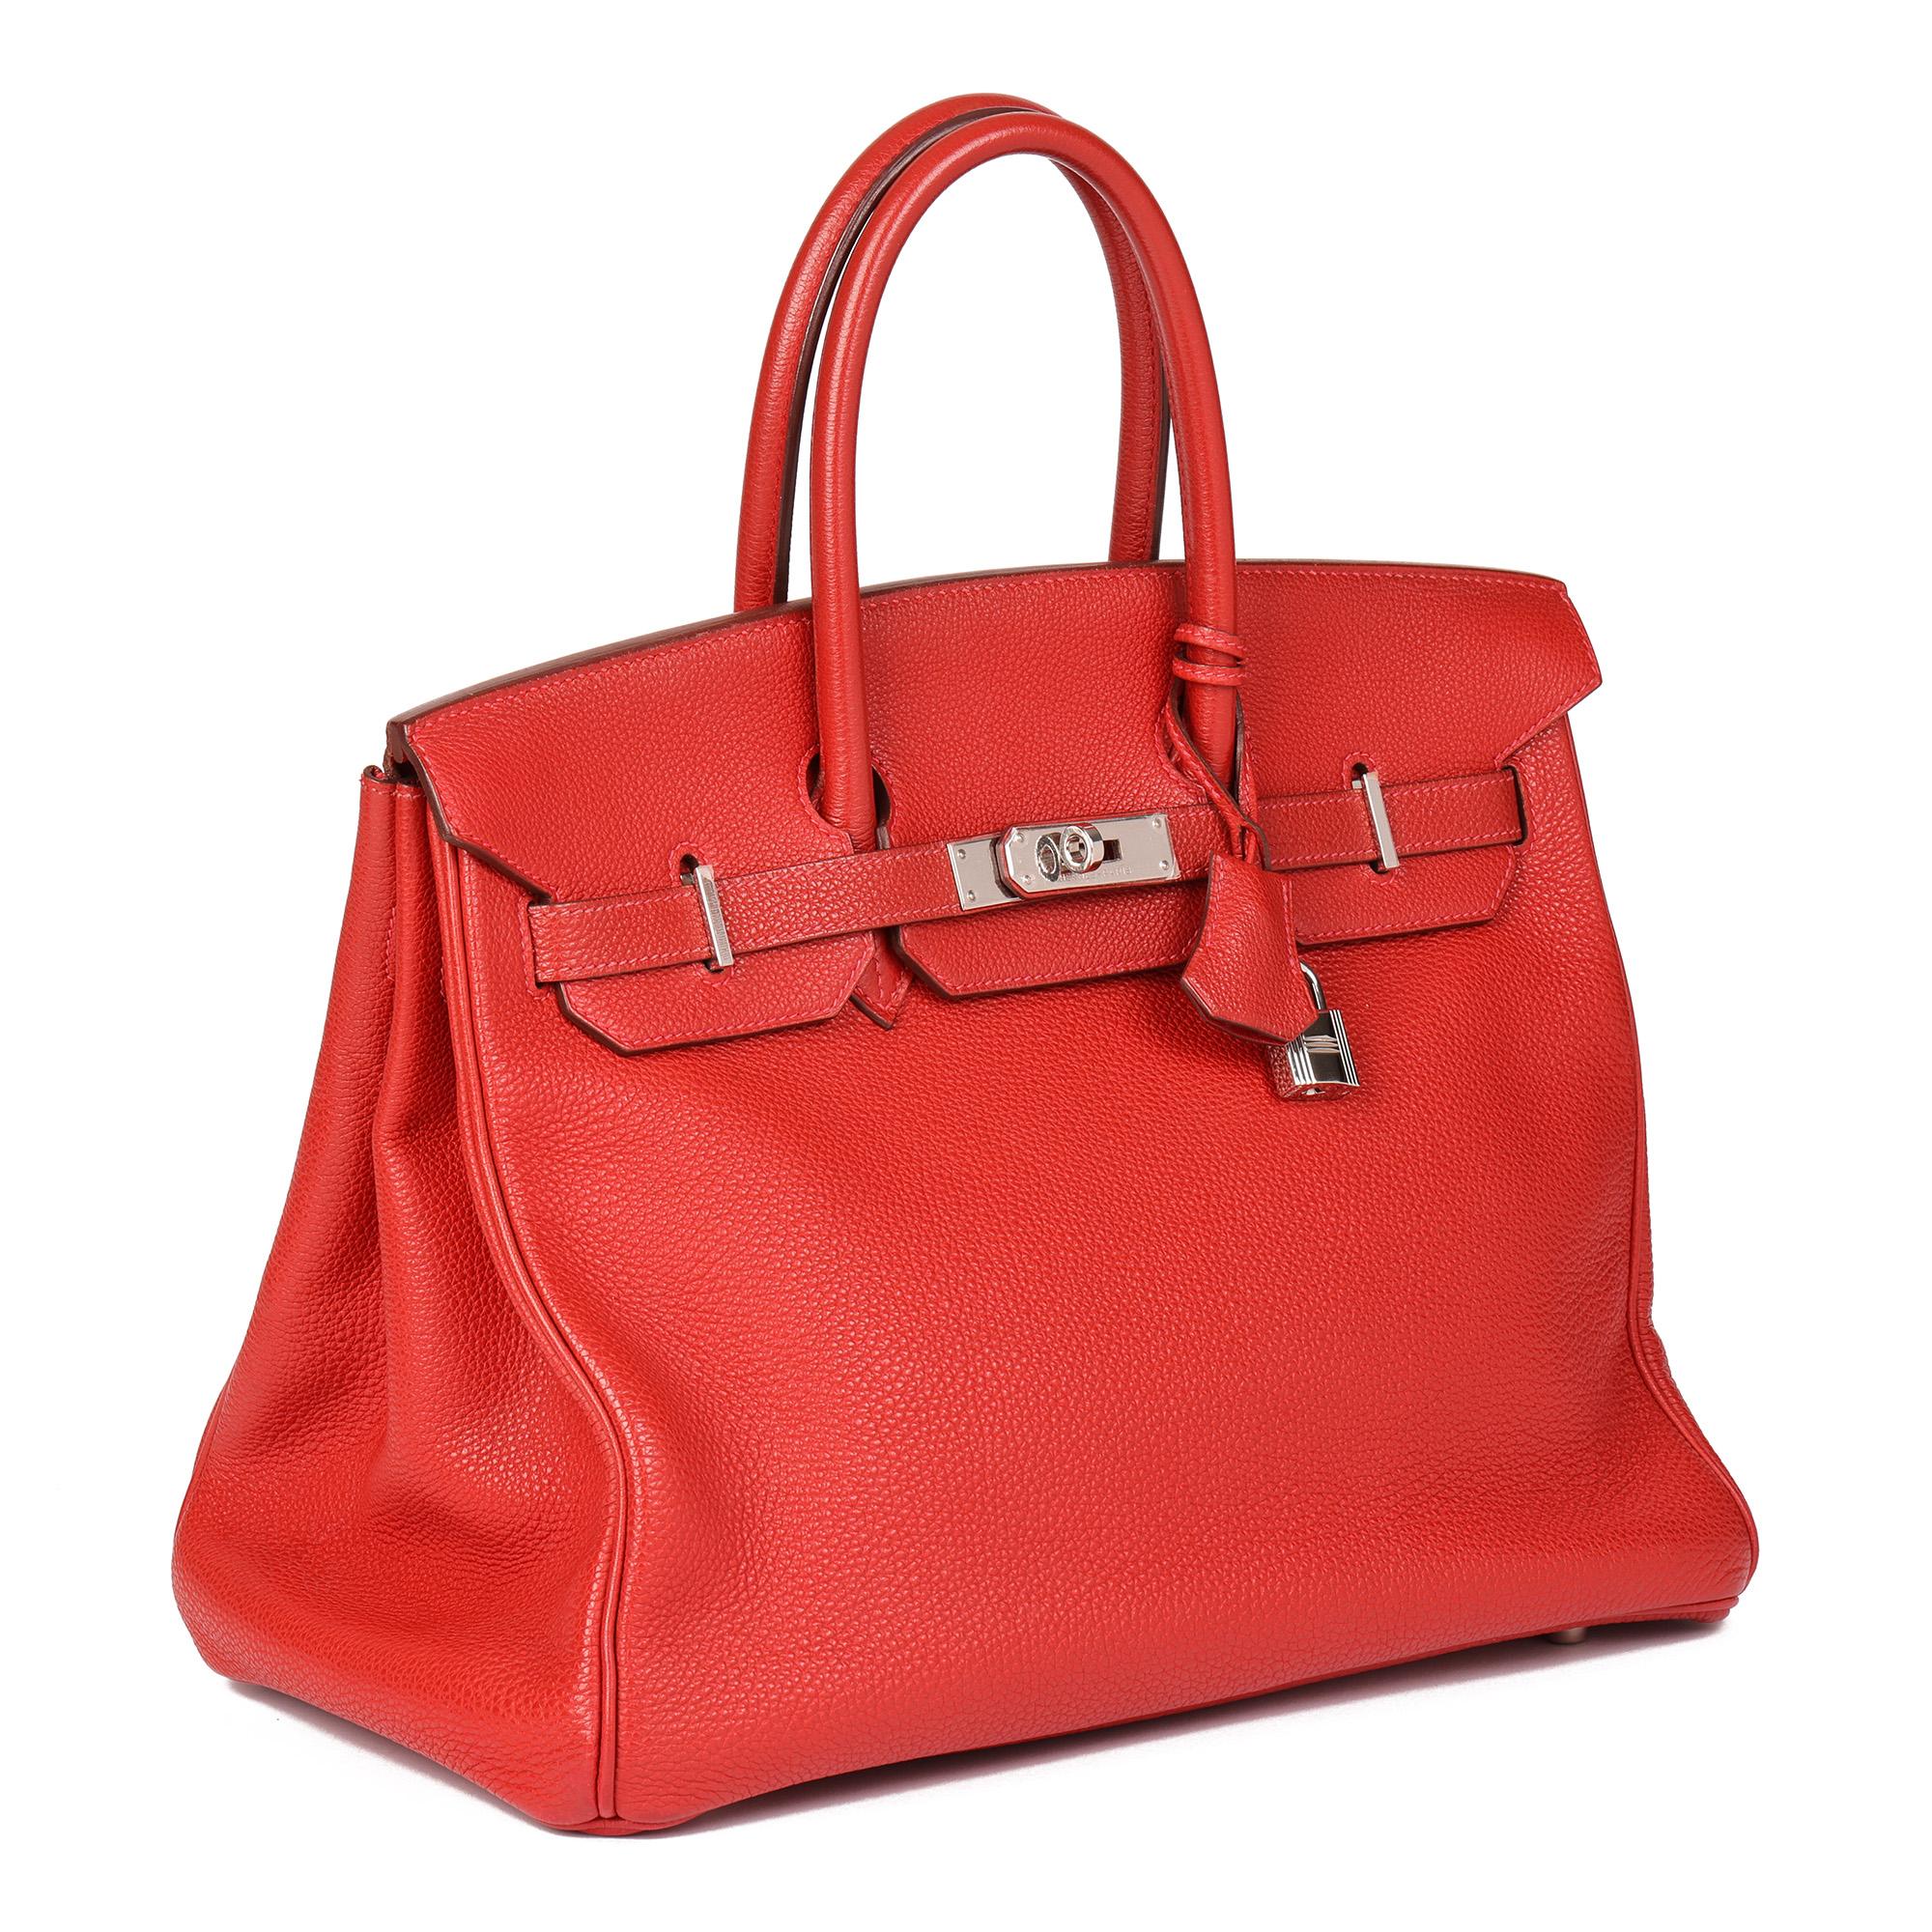 HERMÈS
Rouge Garance Togo Leather Birkin 35cm 

Xupes Reference: JJLG093
Serial Number: [H]
Age (Circa): 2004
Accompanied By: Hermès Dust Bag, Padlock, Keys, Clochette
Authenticity Details: Date Stamp (Made in France) 
Gender: Ladies
Type: